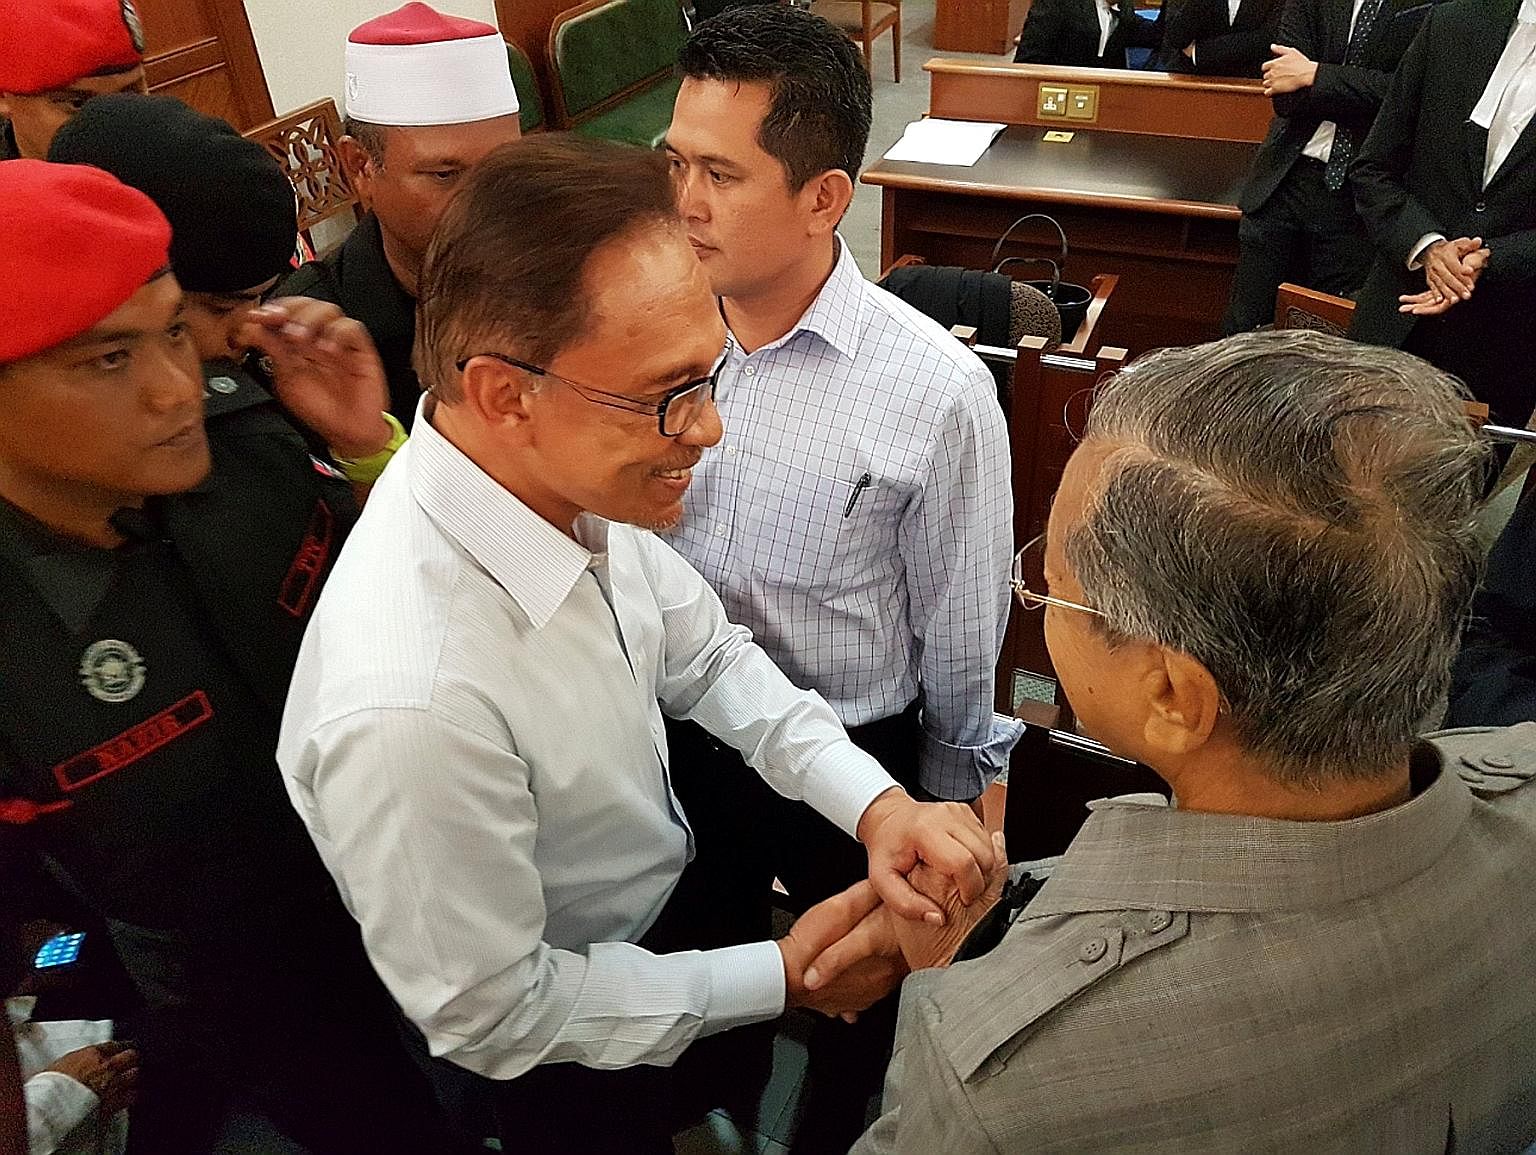 Malaysia's former prime minister, Dr Mahathir (right), shaking hands with Anwar at the Kuala Lumpur High Court on Monday - a gesture that led many to wonder if this could be the start of a new chapter in the country's politics.